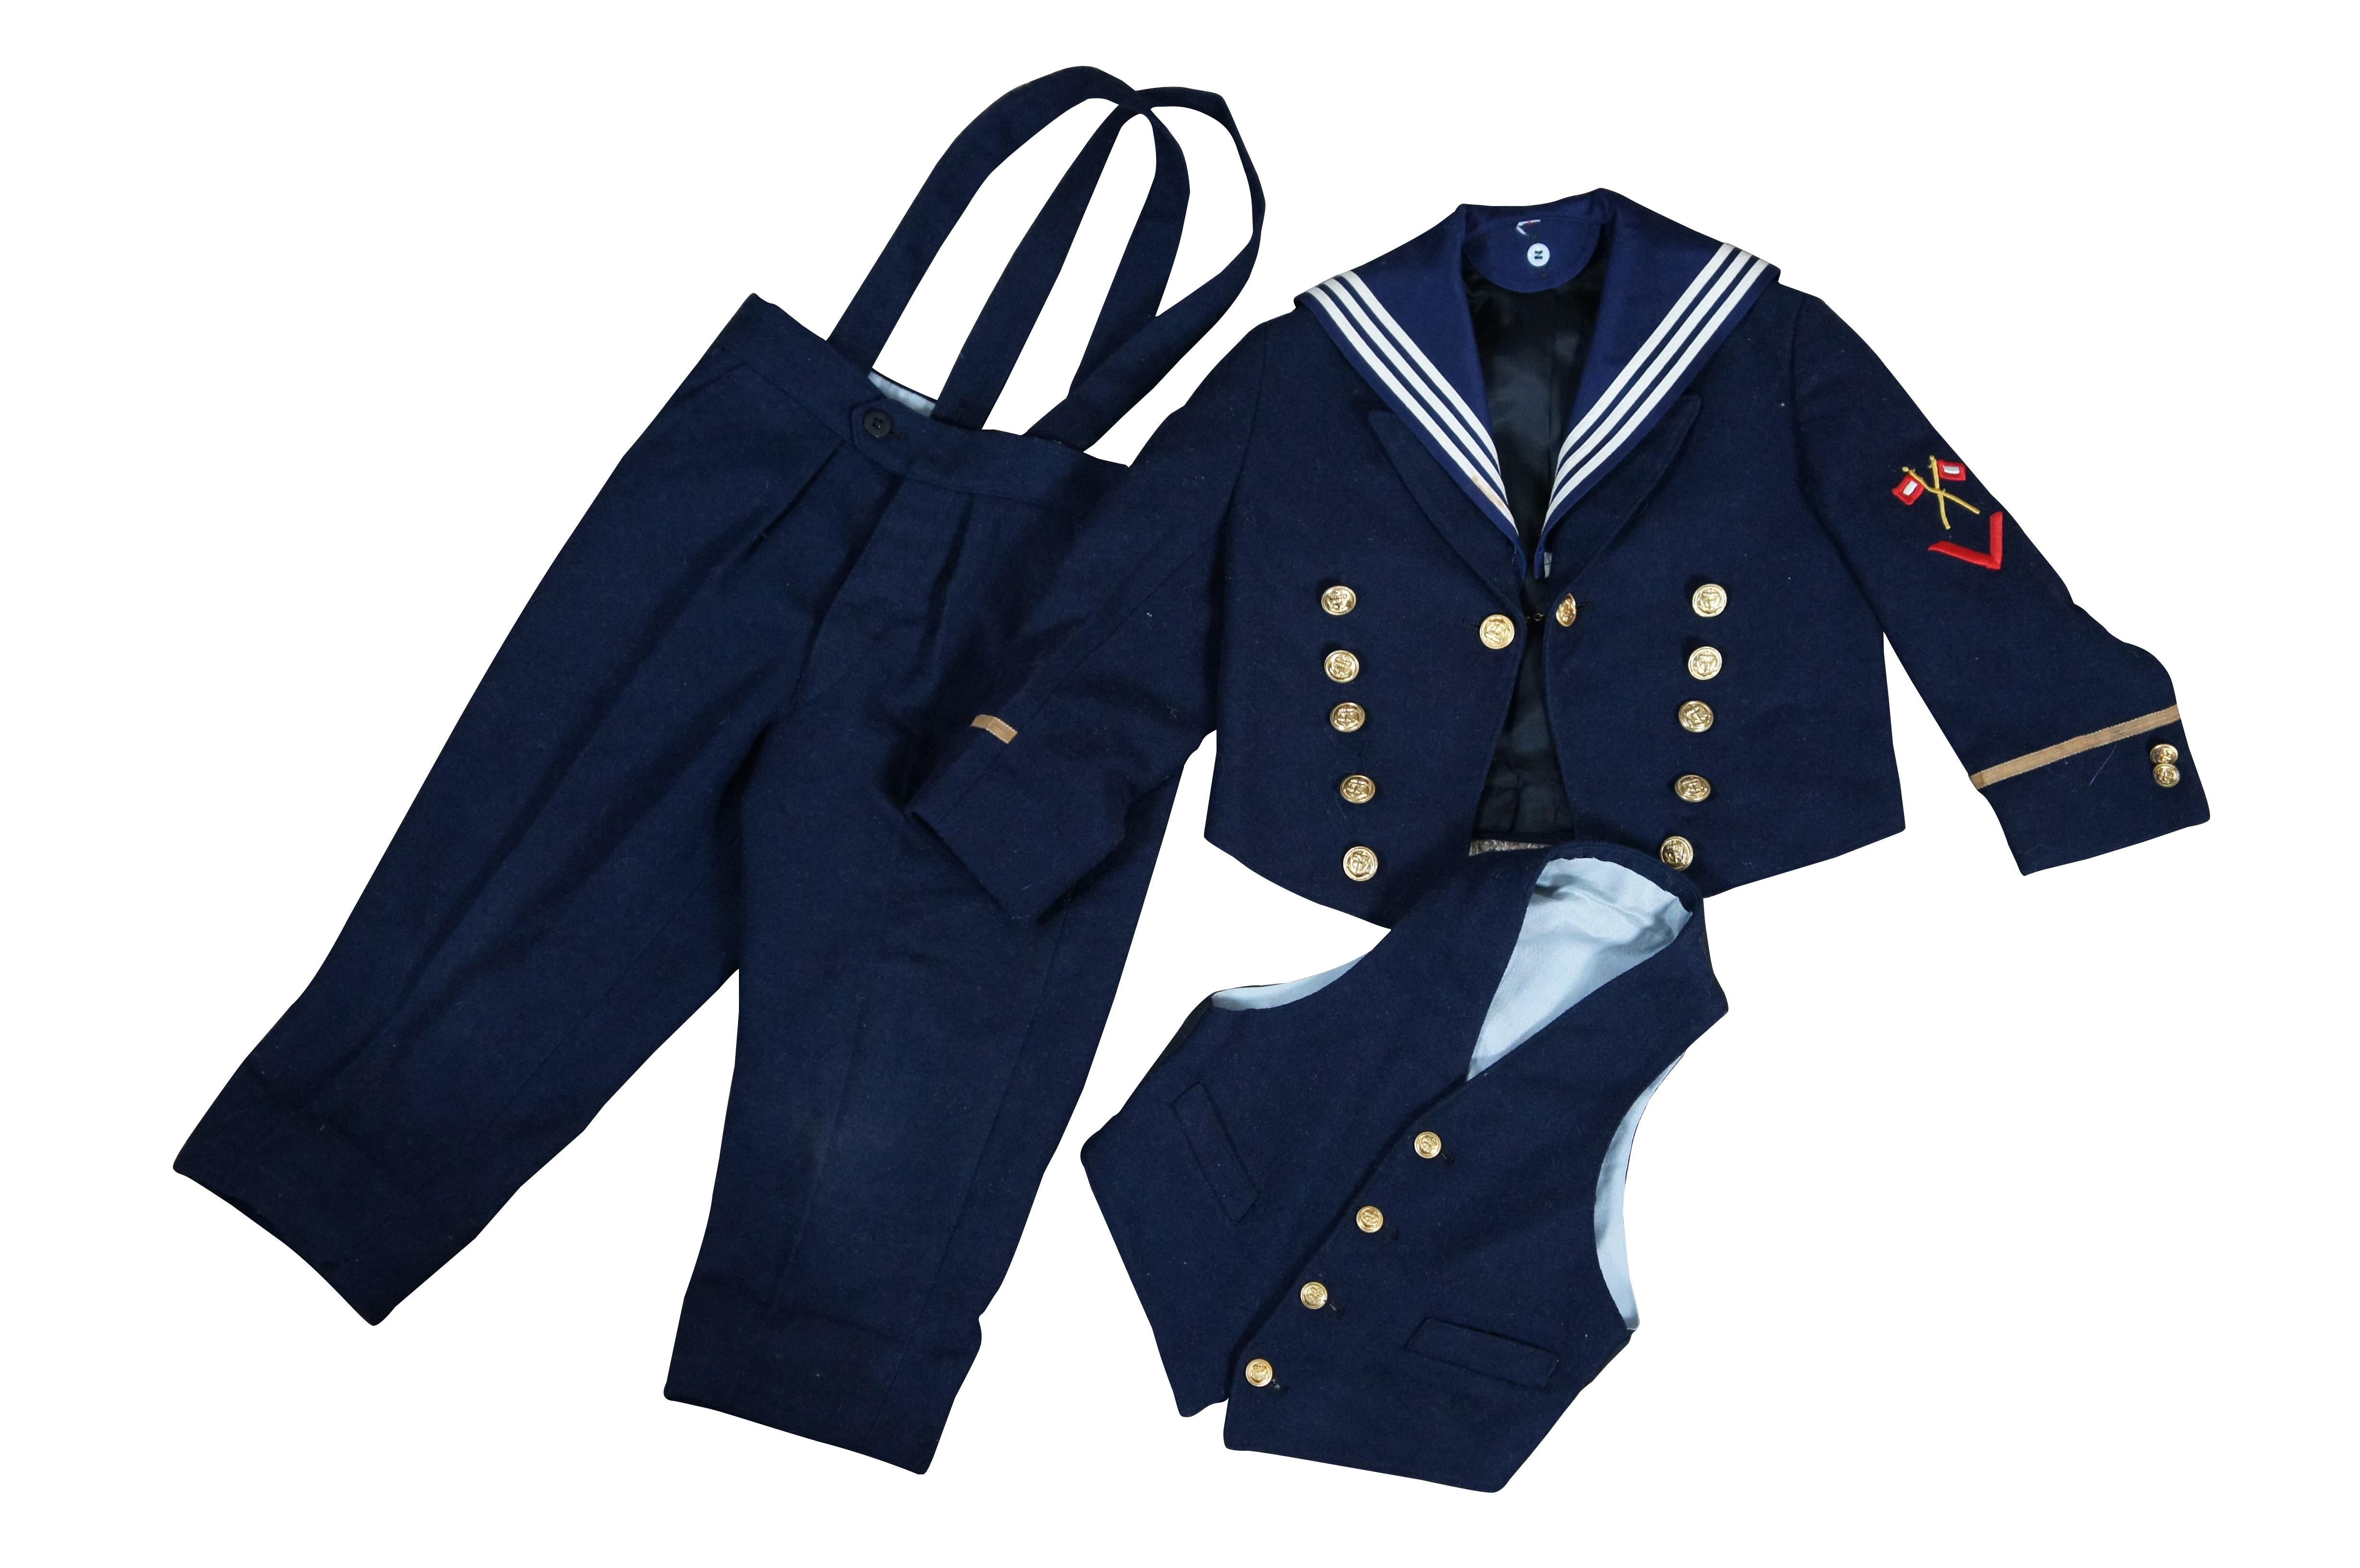 Antique German 1930s three piece toddler / child / doll sized uniform or sailor suit.  Made of navy blue wool featuring a coat, vest and pants with white stripe and gold button accents.  The uniform its tailored like a 